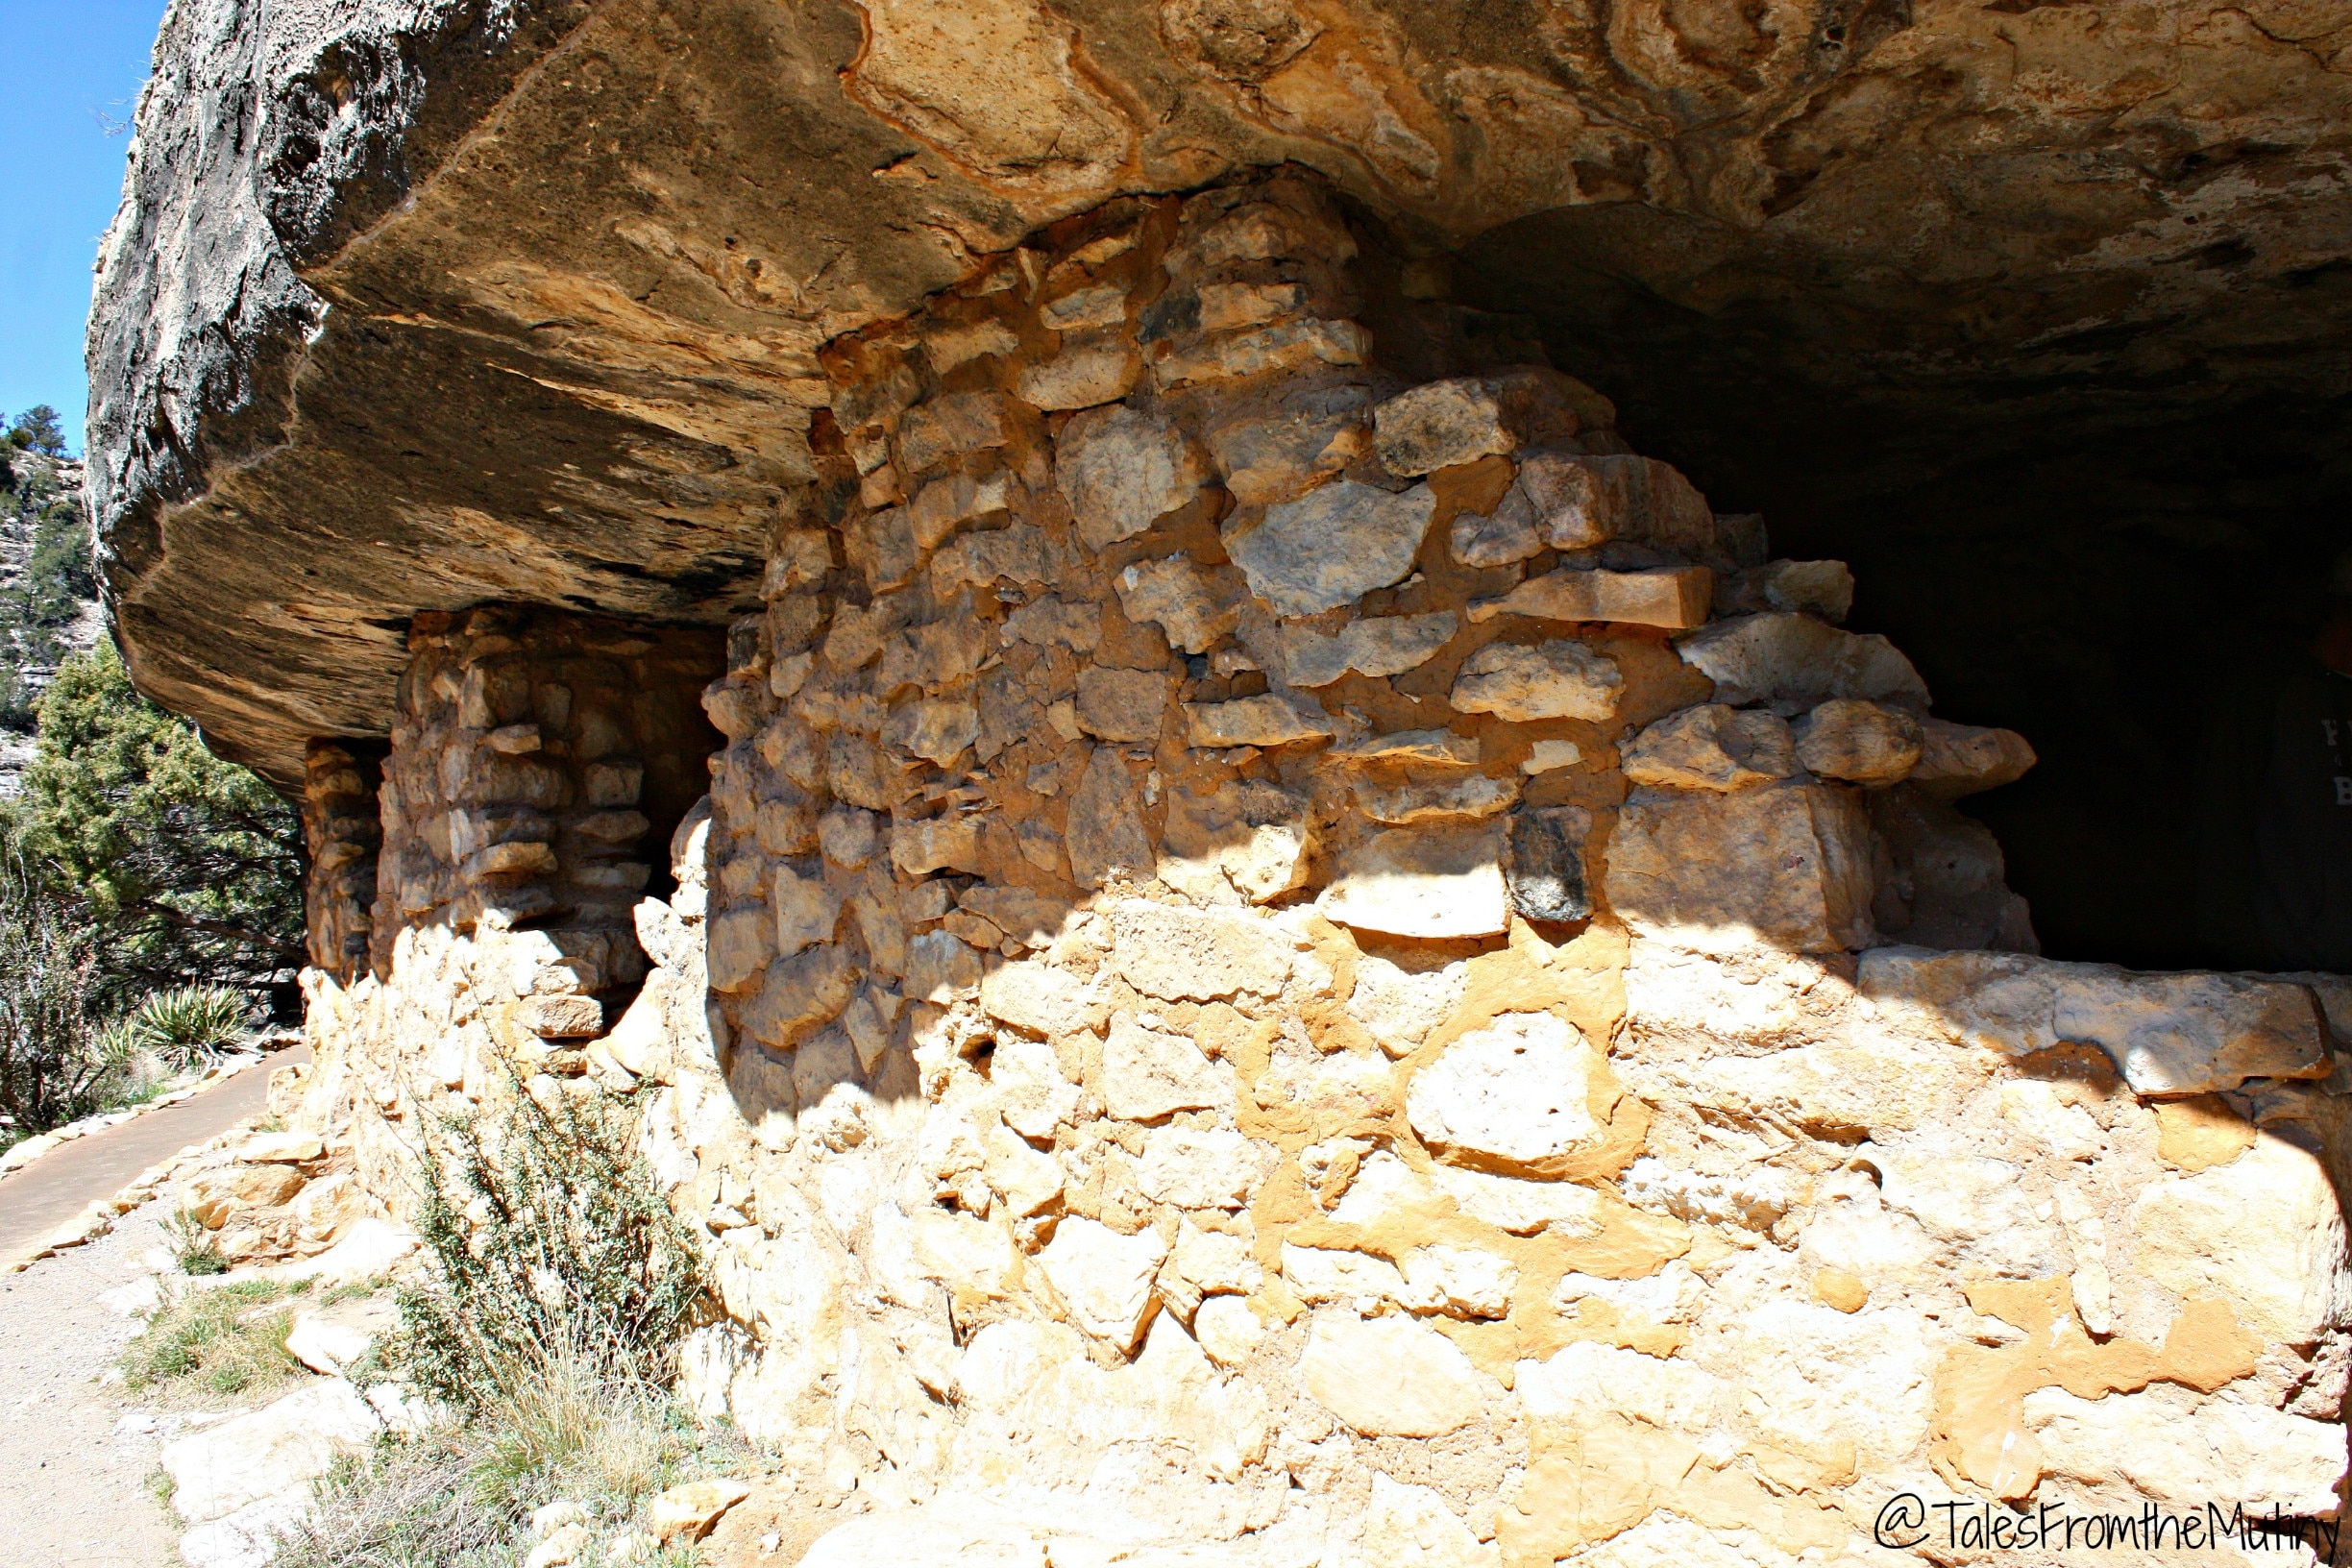 Another little known monument in the #NationalPark system is Walnut Canyon...ancient cliff dwellings near Flagstaff, AZ. 